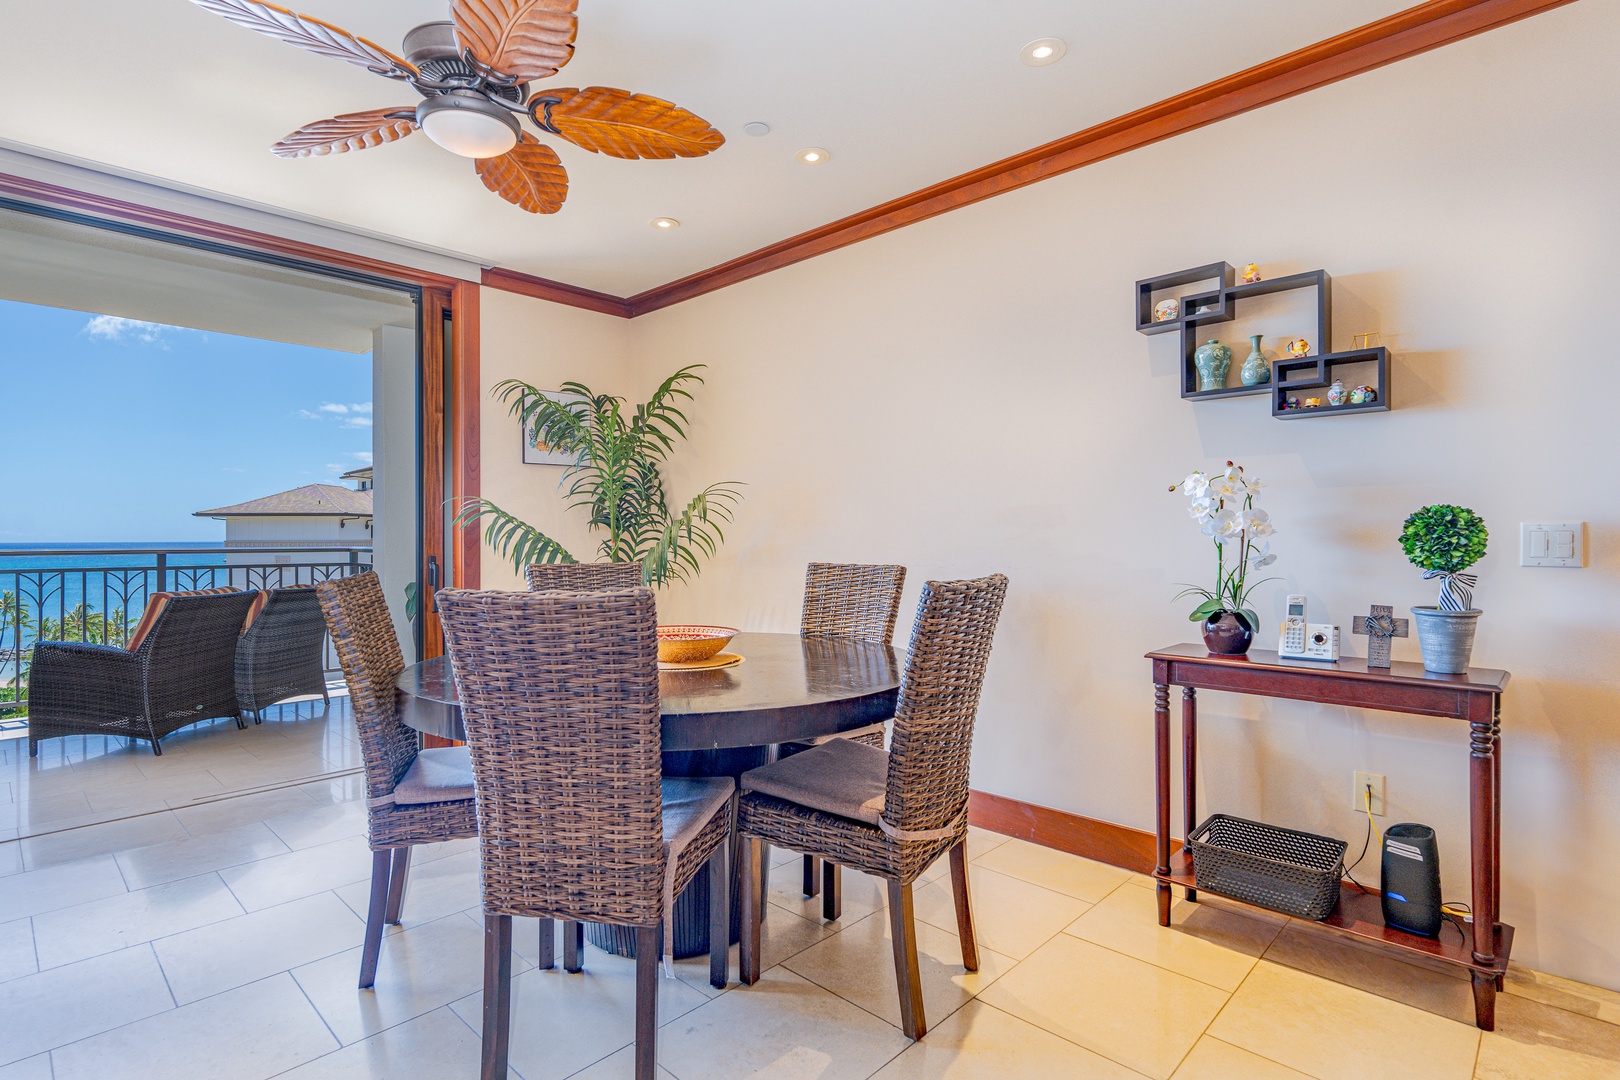 Kapolei Vacation Rentals, Ko Olina Beach Villas O904 - Game night after dinner at the dining table for happy memories.